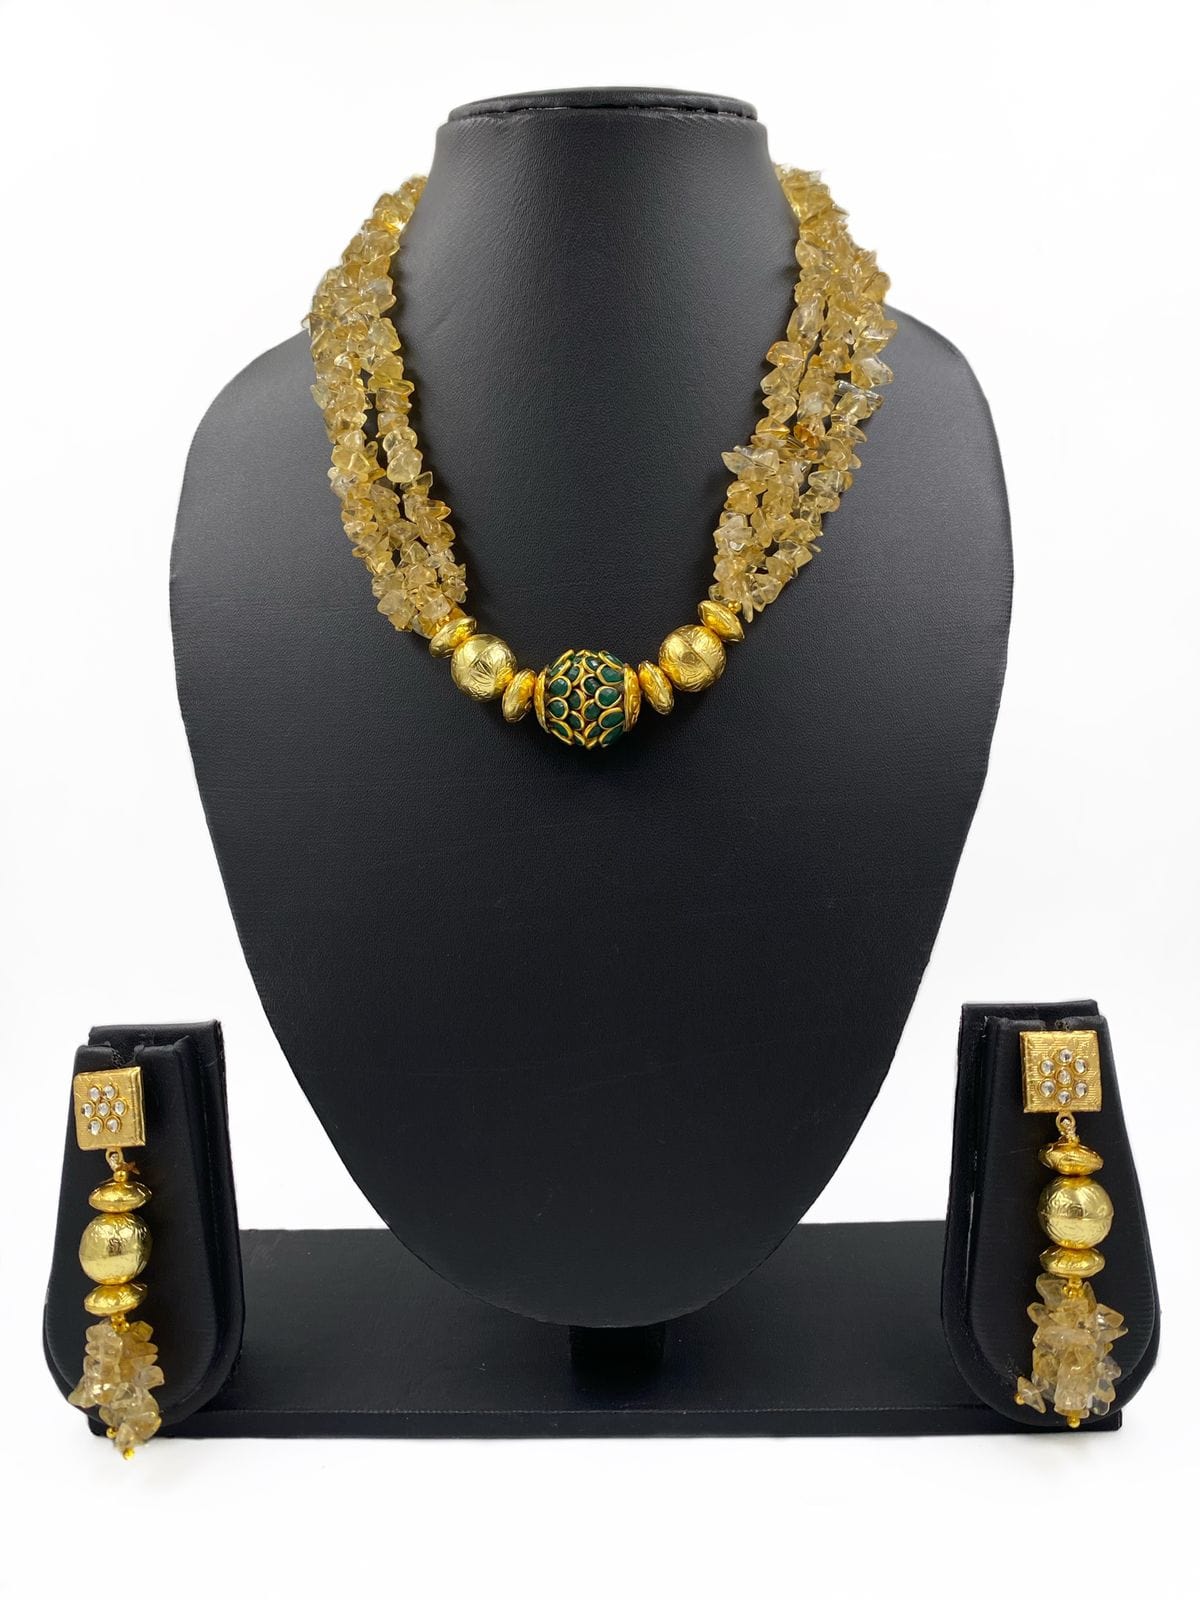 Fashionable Semi Precious Yellow Citrine Uncut Beads Necklace By Gehna Shop Beads Jewellery